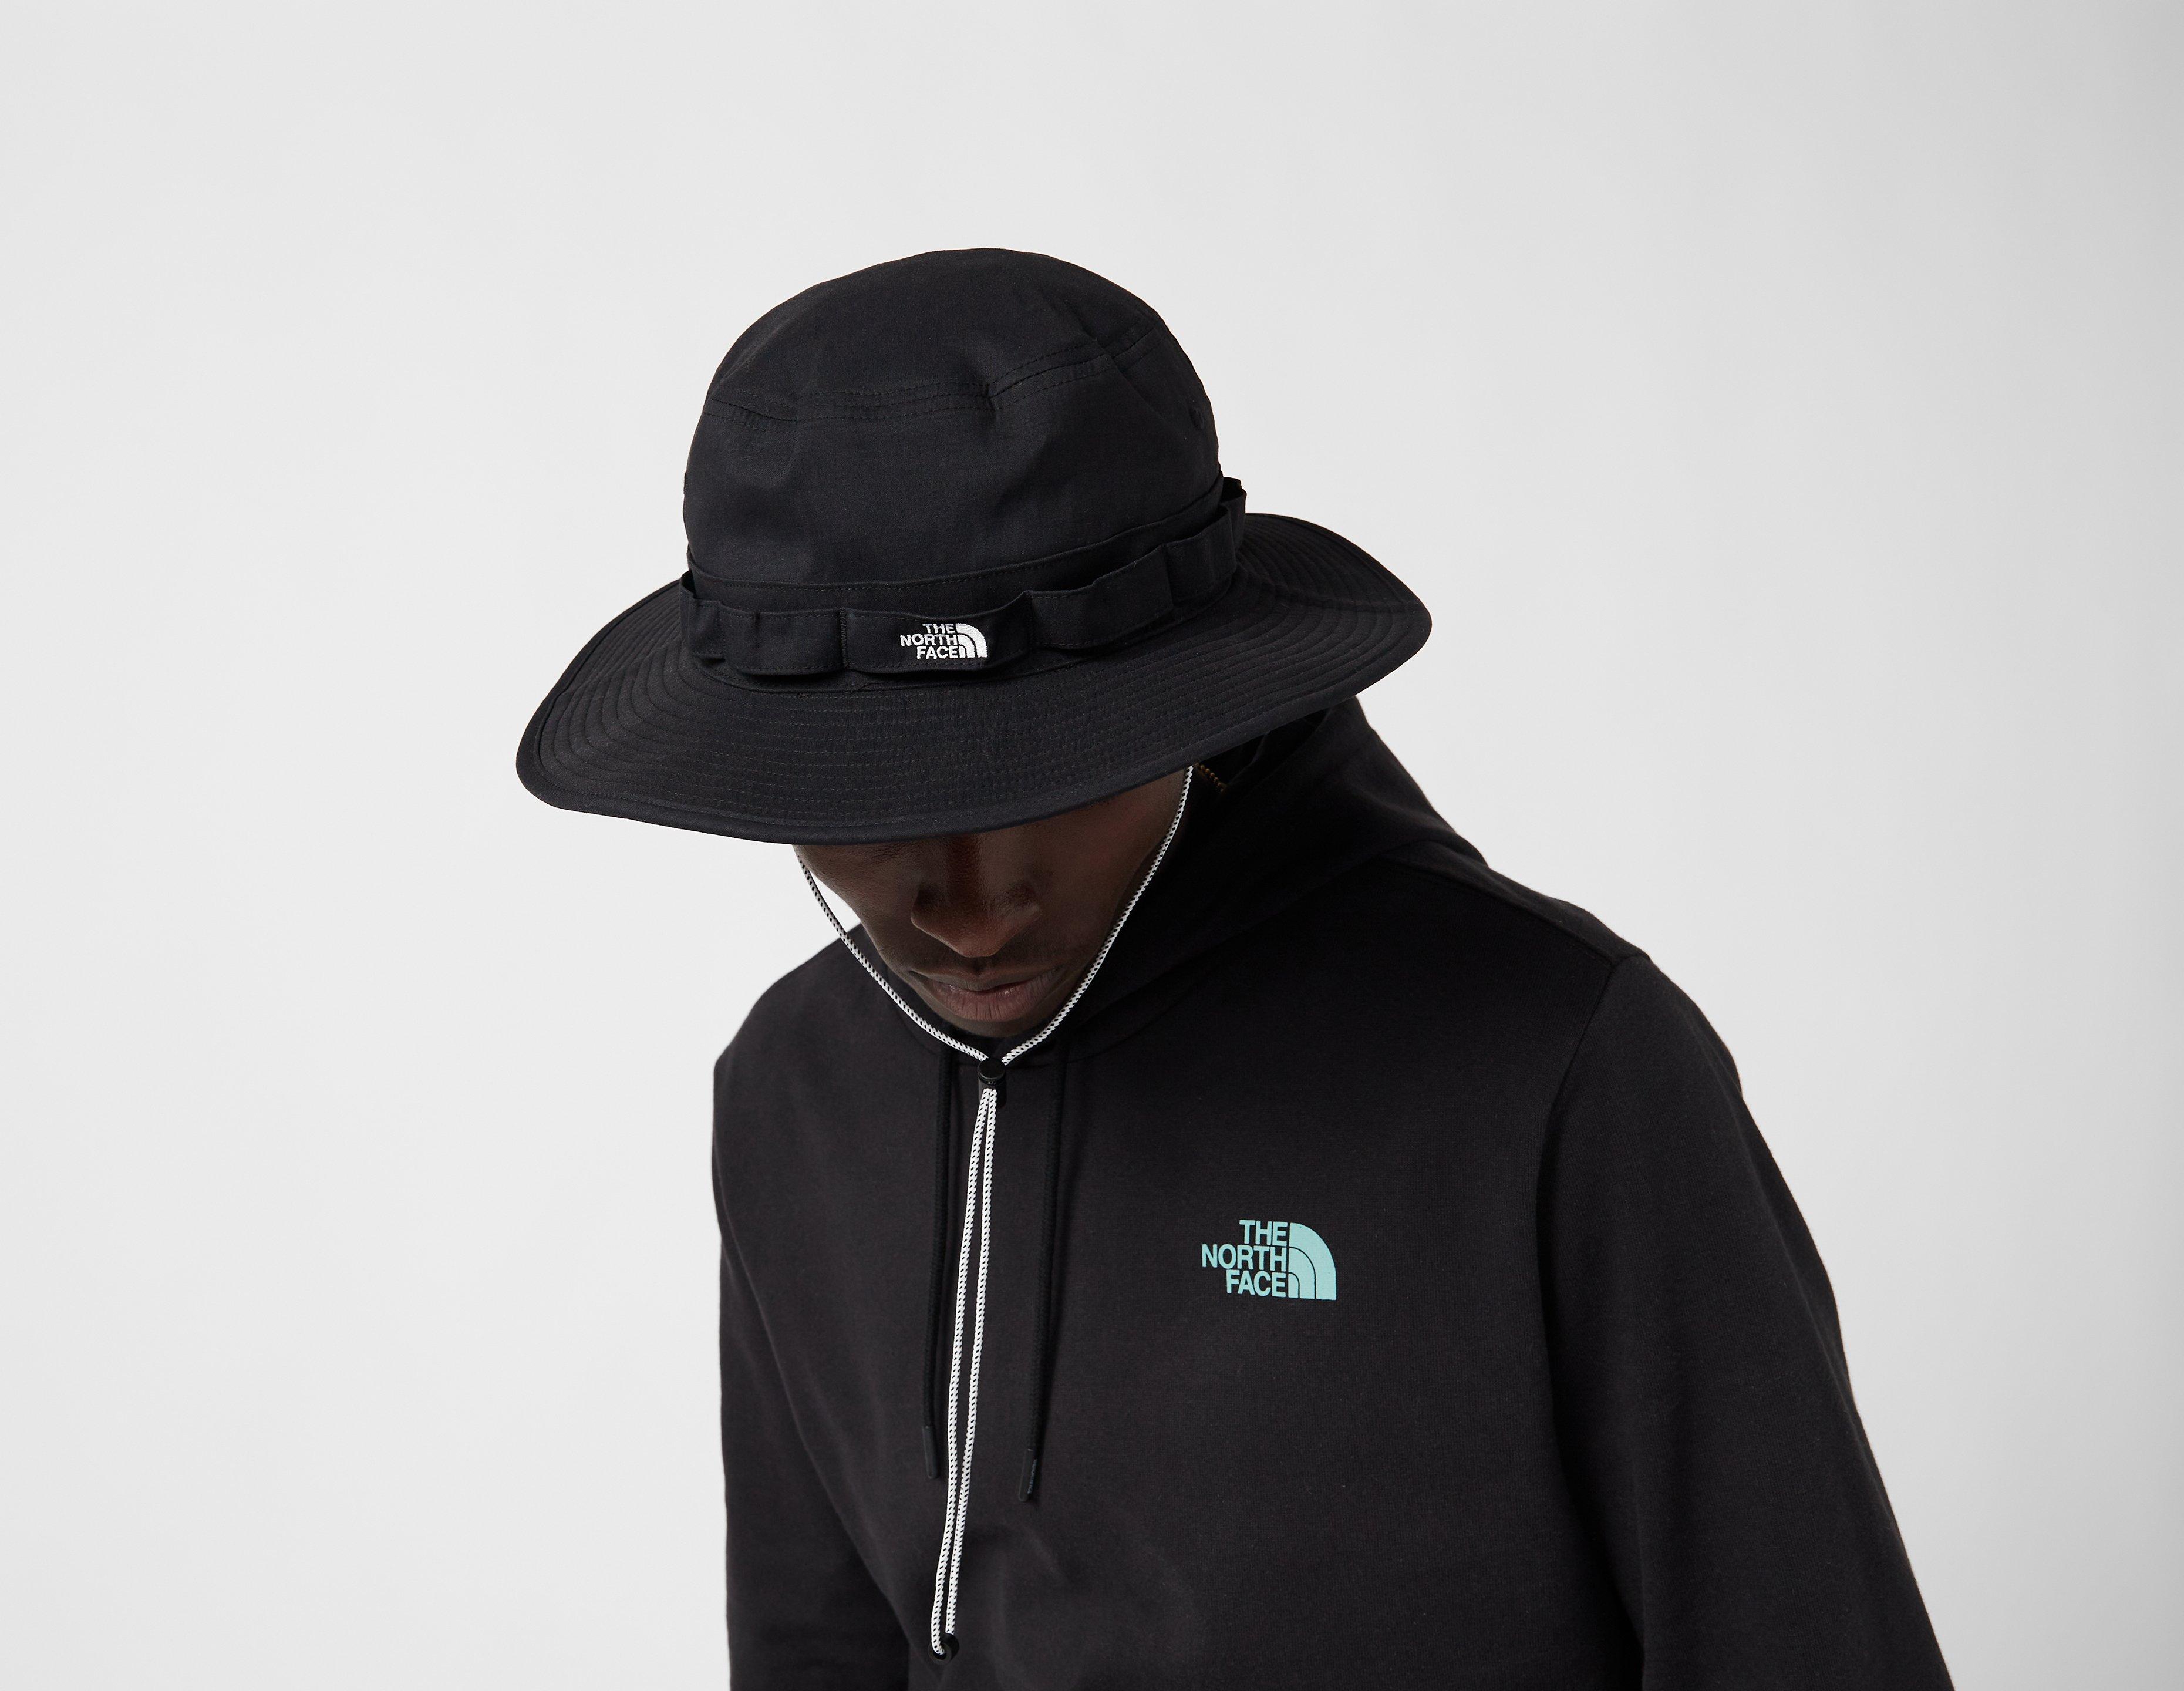 hat Top 7 belts, Black The North Face Class V Brimmer Hat Top